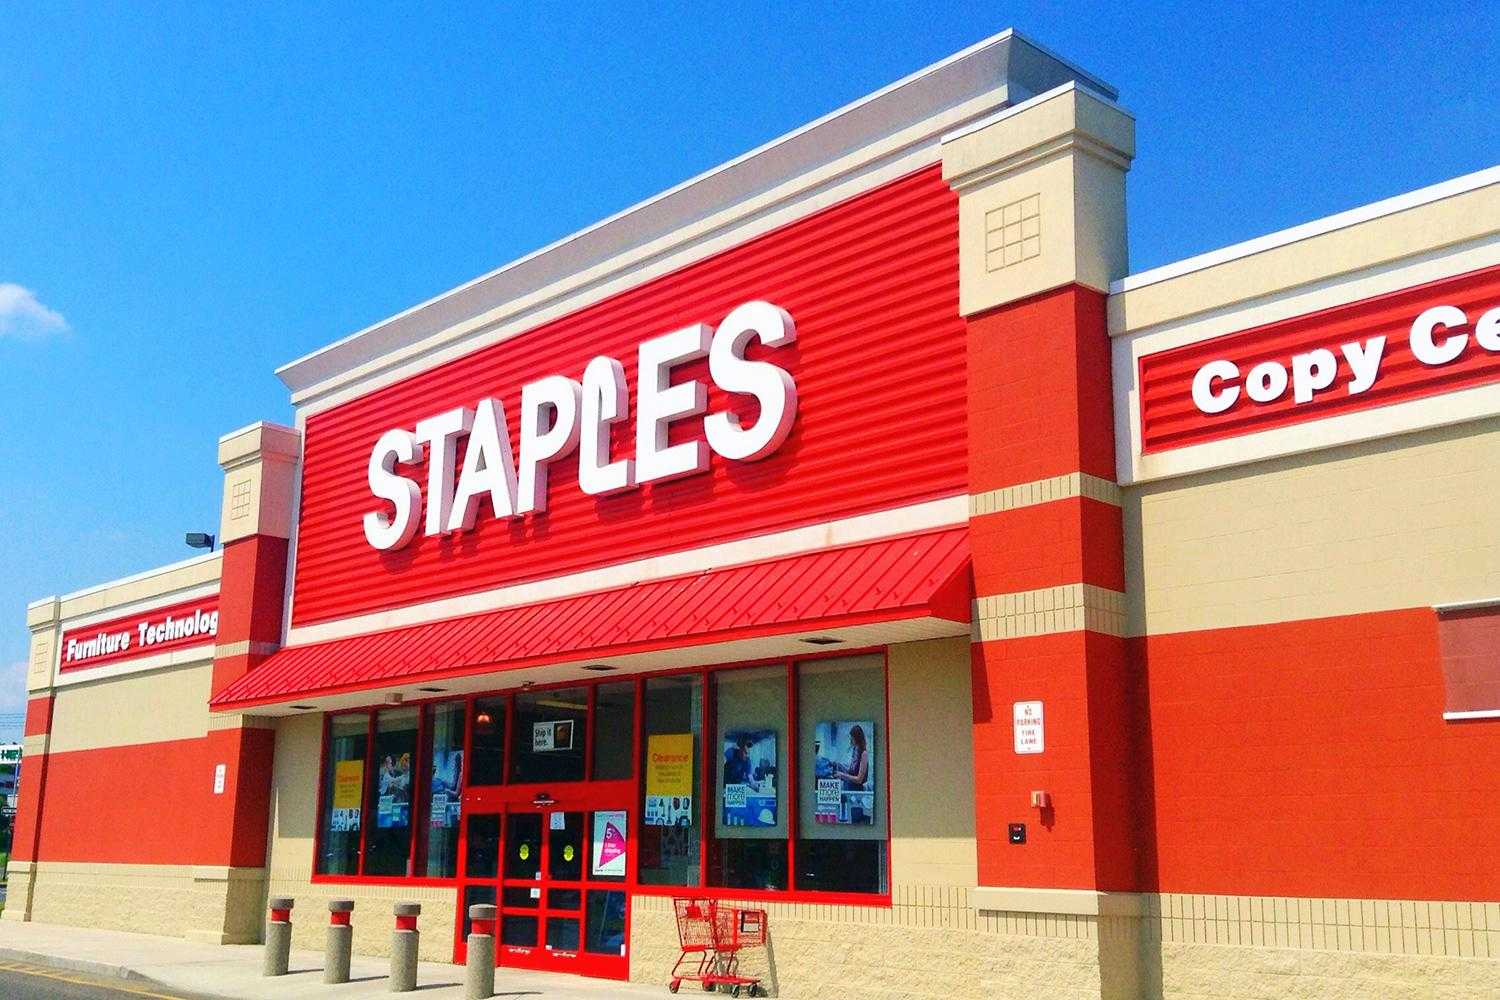 Staples Office Supply Store Near Me 2019 | United States Maps